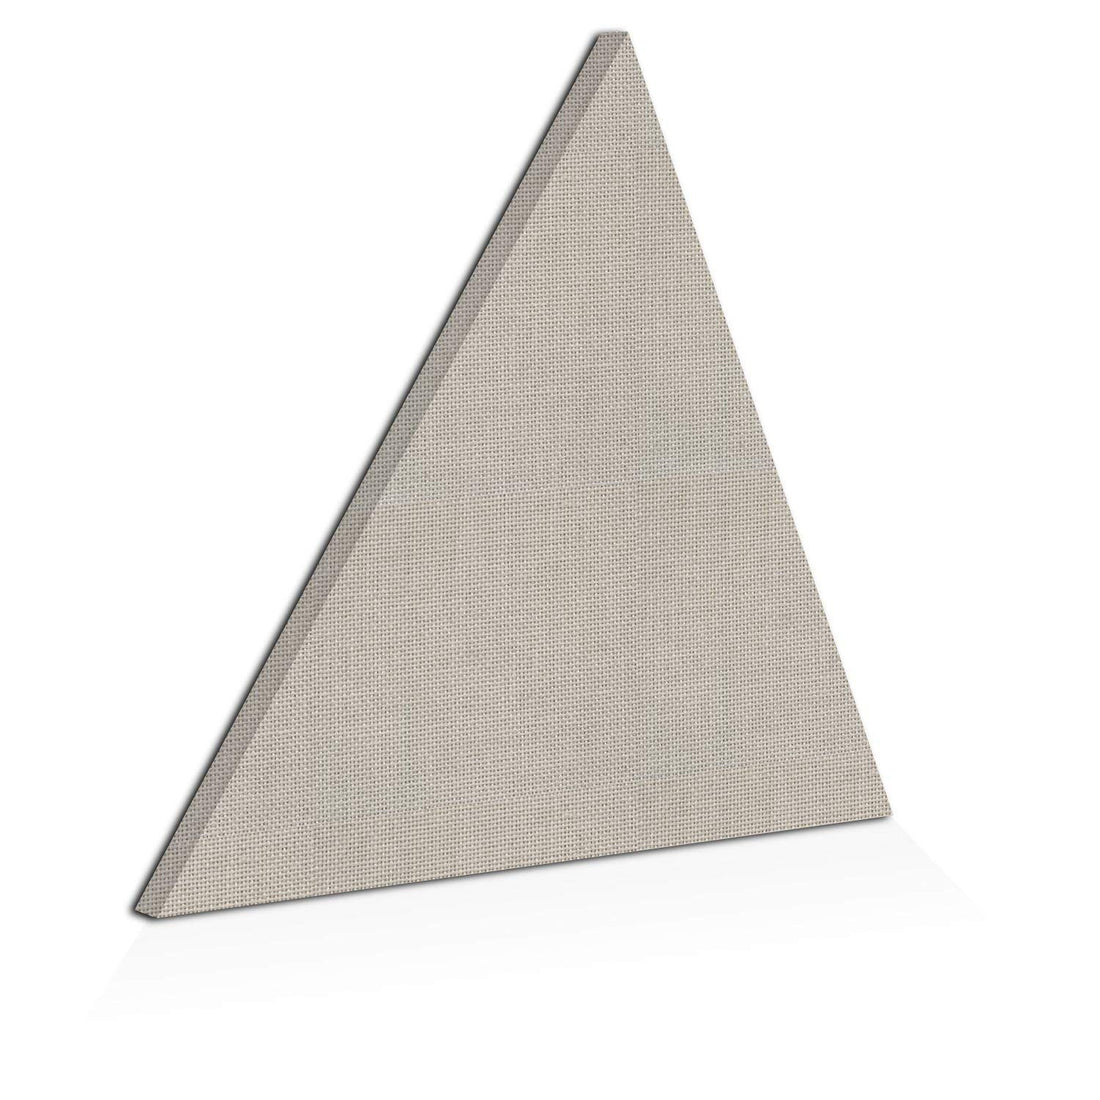 Acoustic Design Works Acoustic Panel Equilateral Triangle 2" - 1 piece